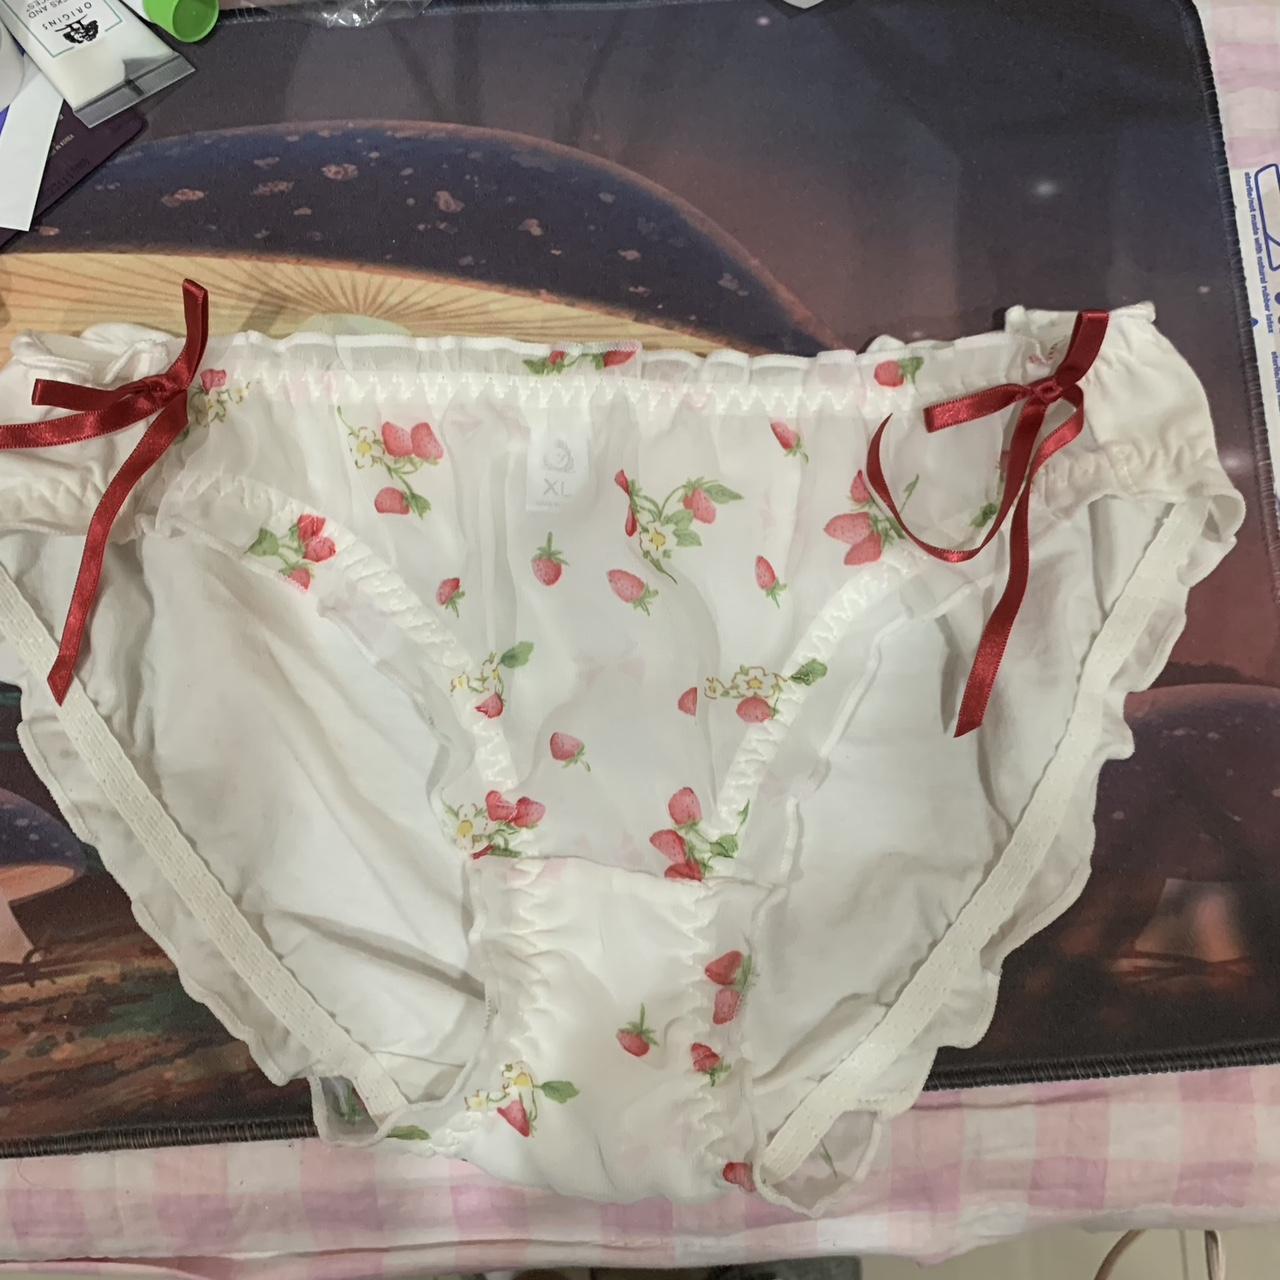 completely new strawberry mesh underwear with bows - Depop